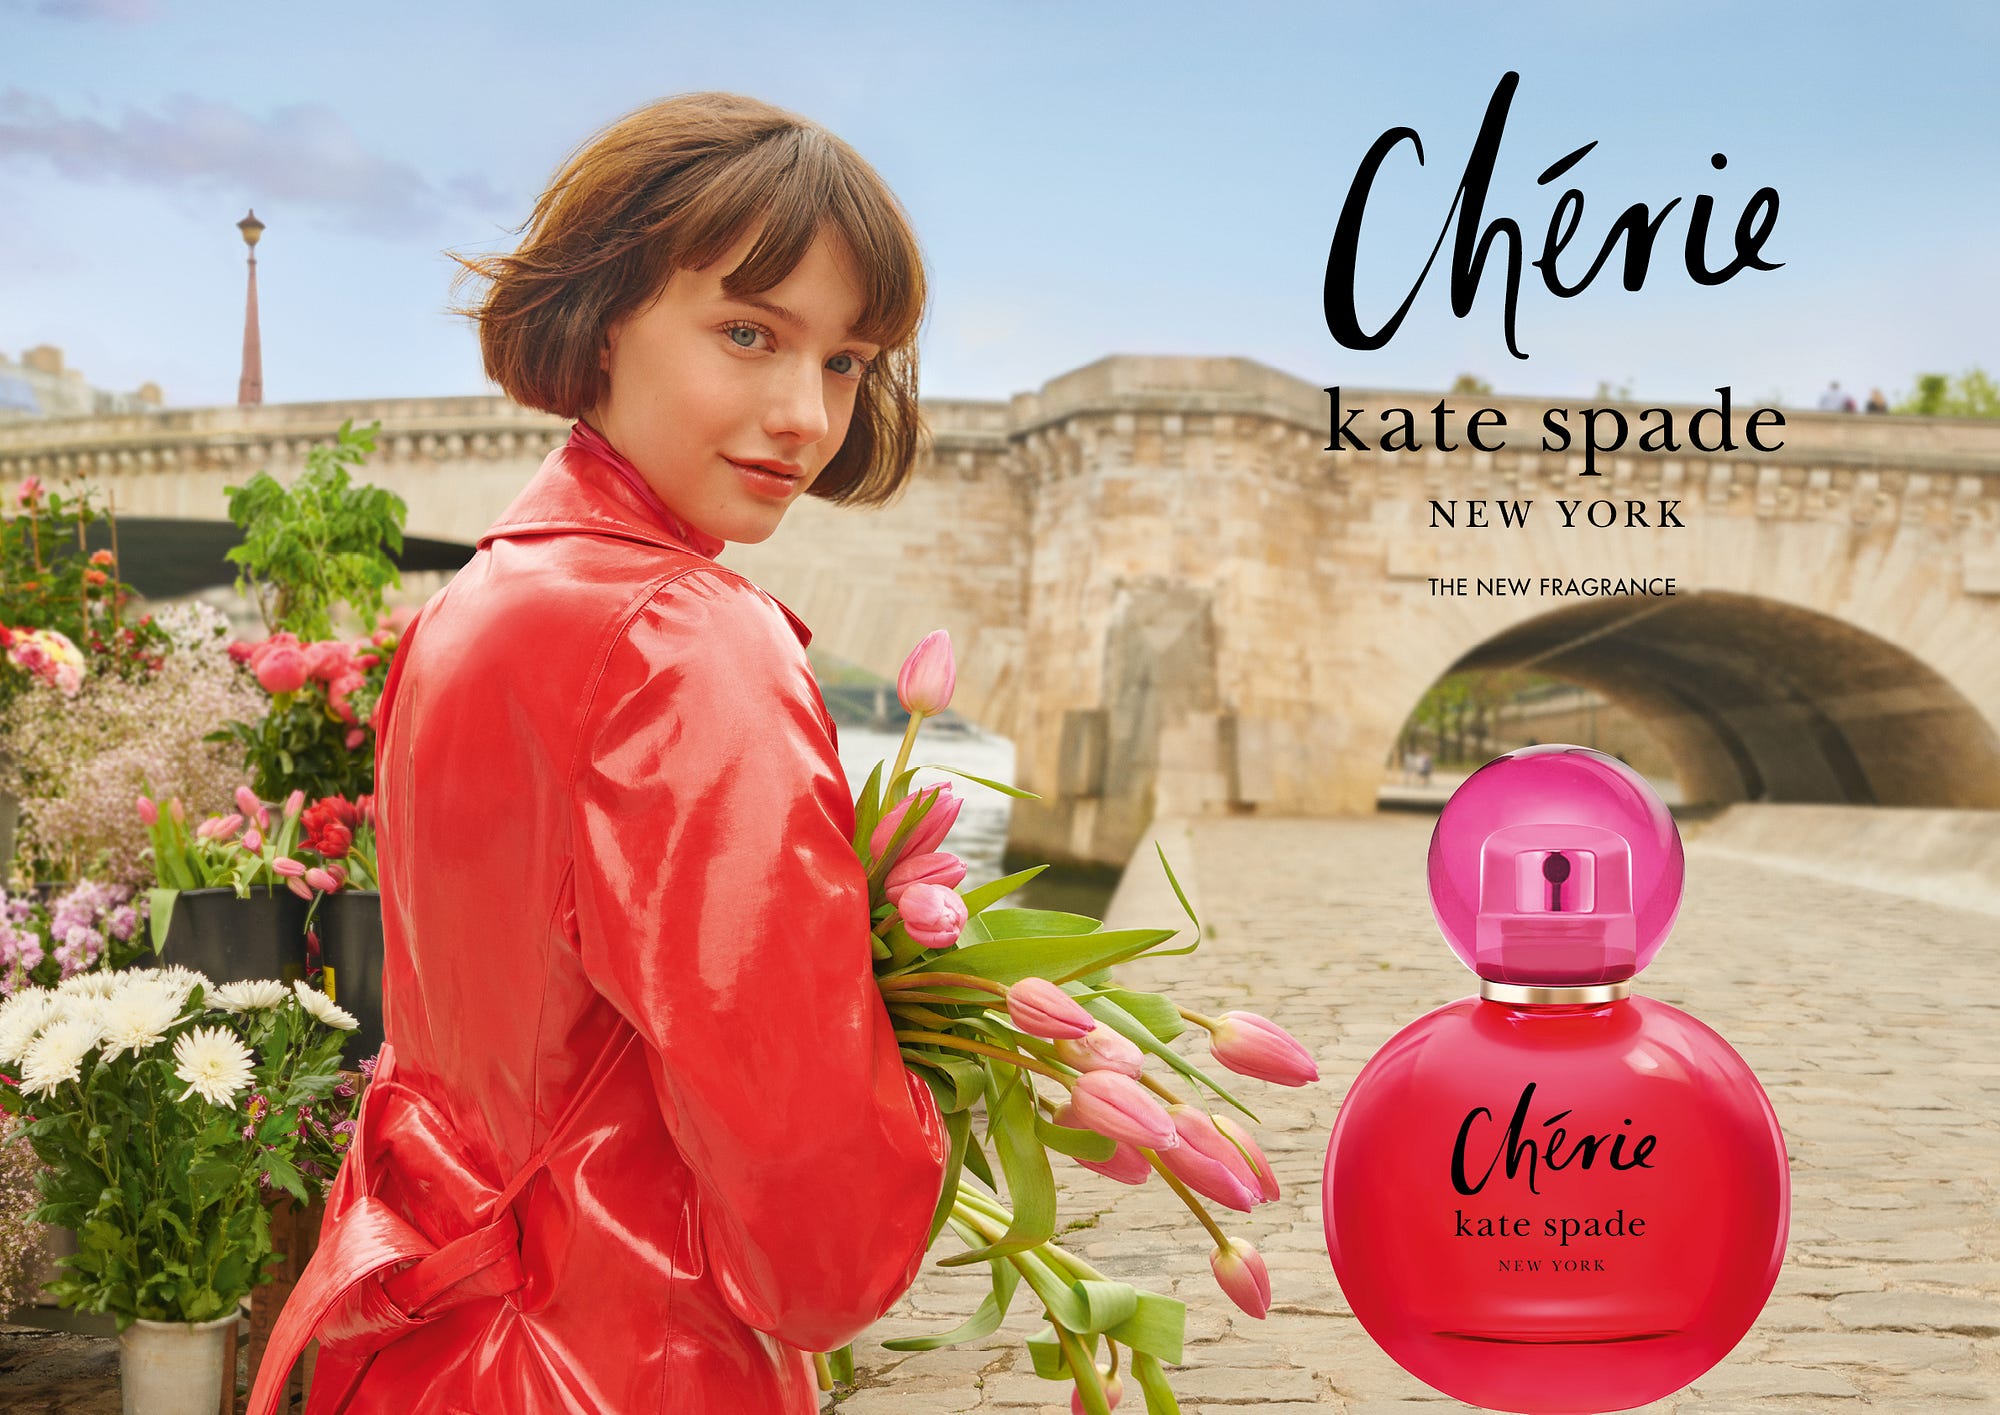 Kate Spade New York Cherie Brings A Fresh Pop Of Energy & Color To Its  Fragrance Assortment | THREAD by ZALORA